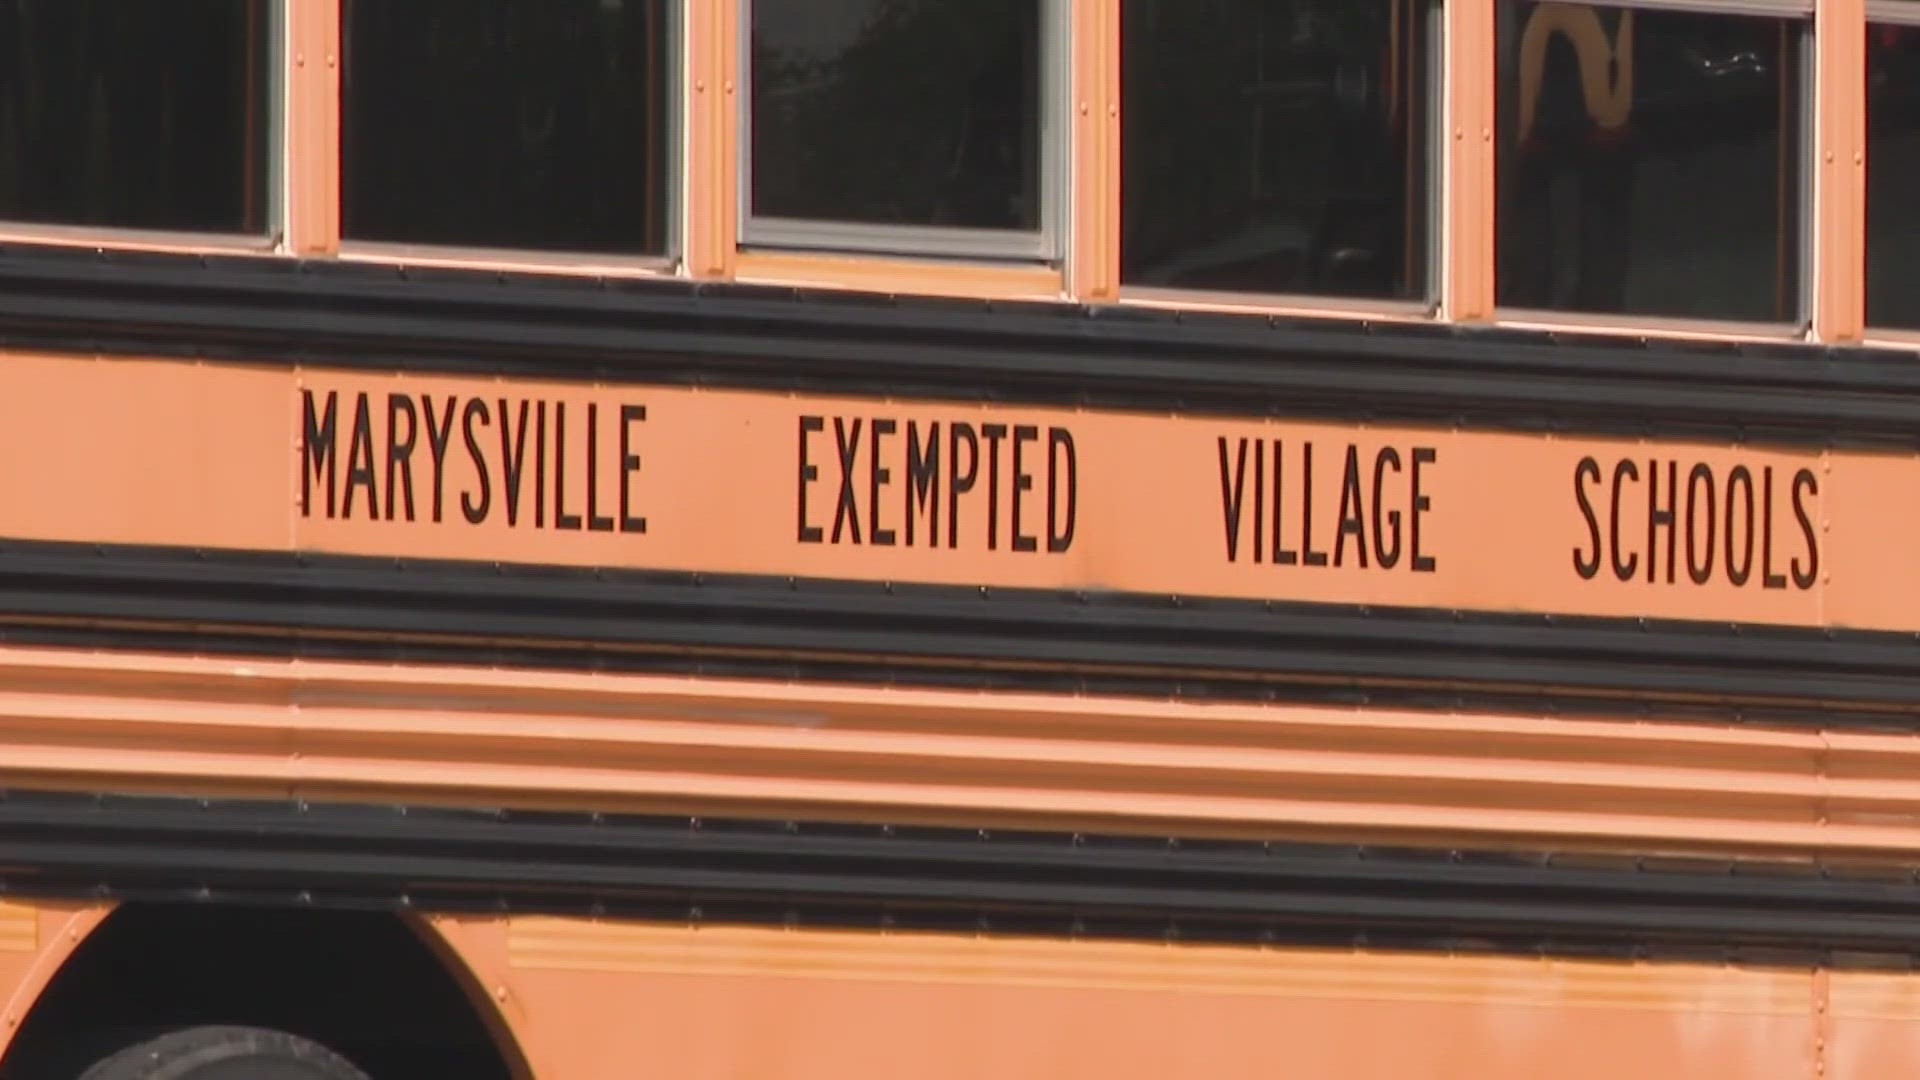 An overwhelming amount of growth on top of a lack of bus drivers has school district leaders in Marysville preparing to rework bell schedules.